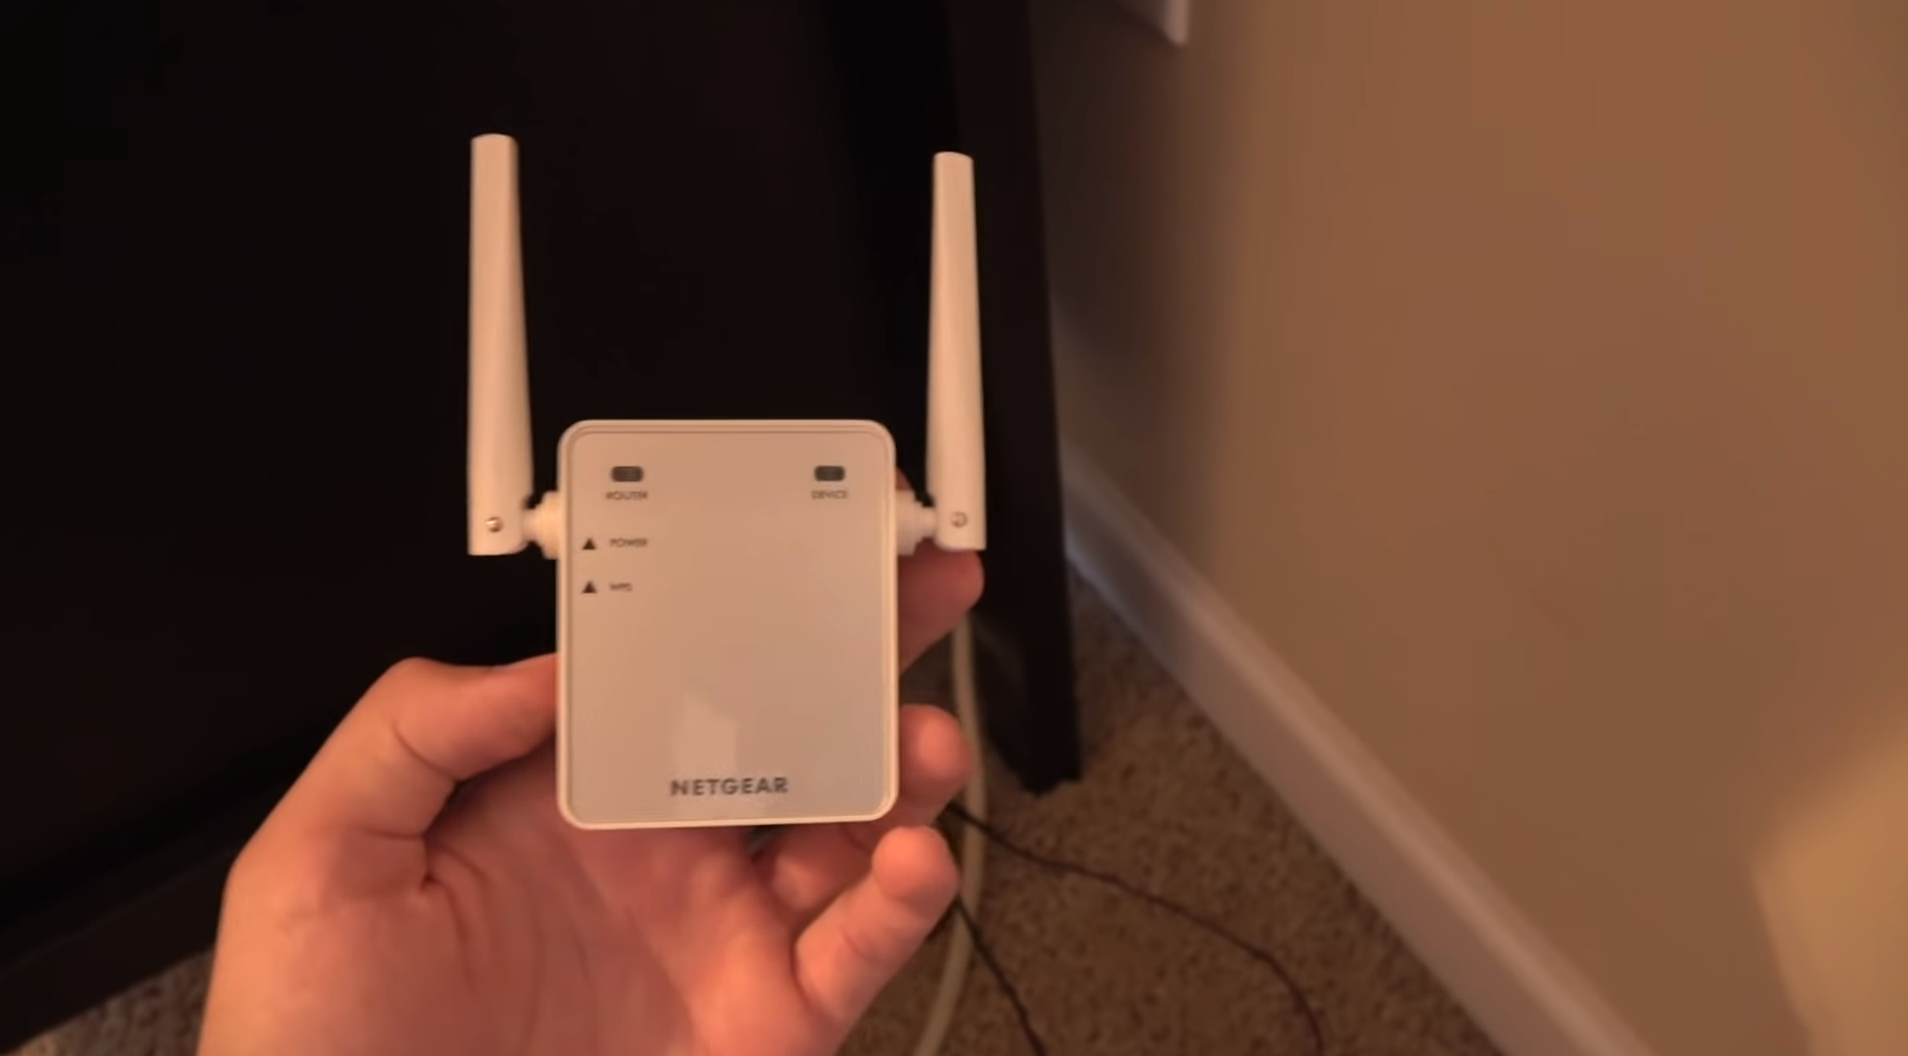 How Does a WiFi Router Work?